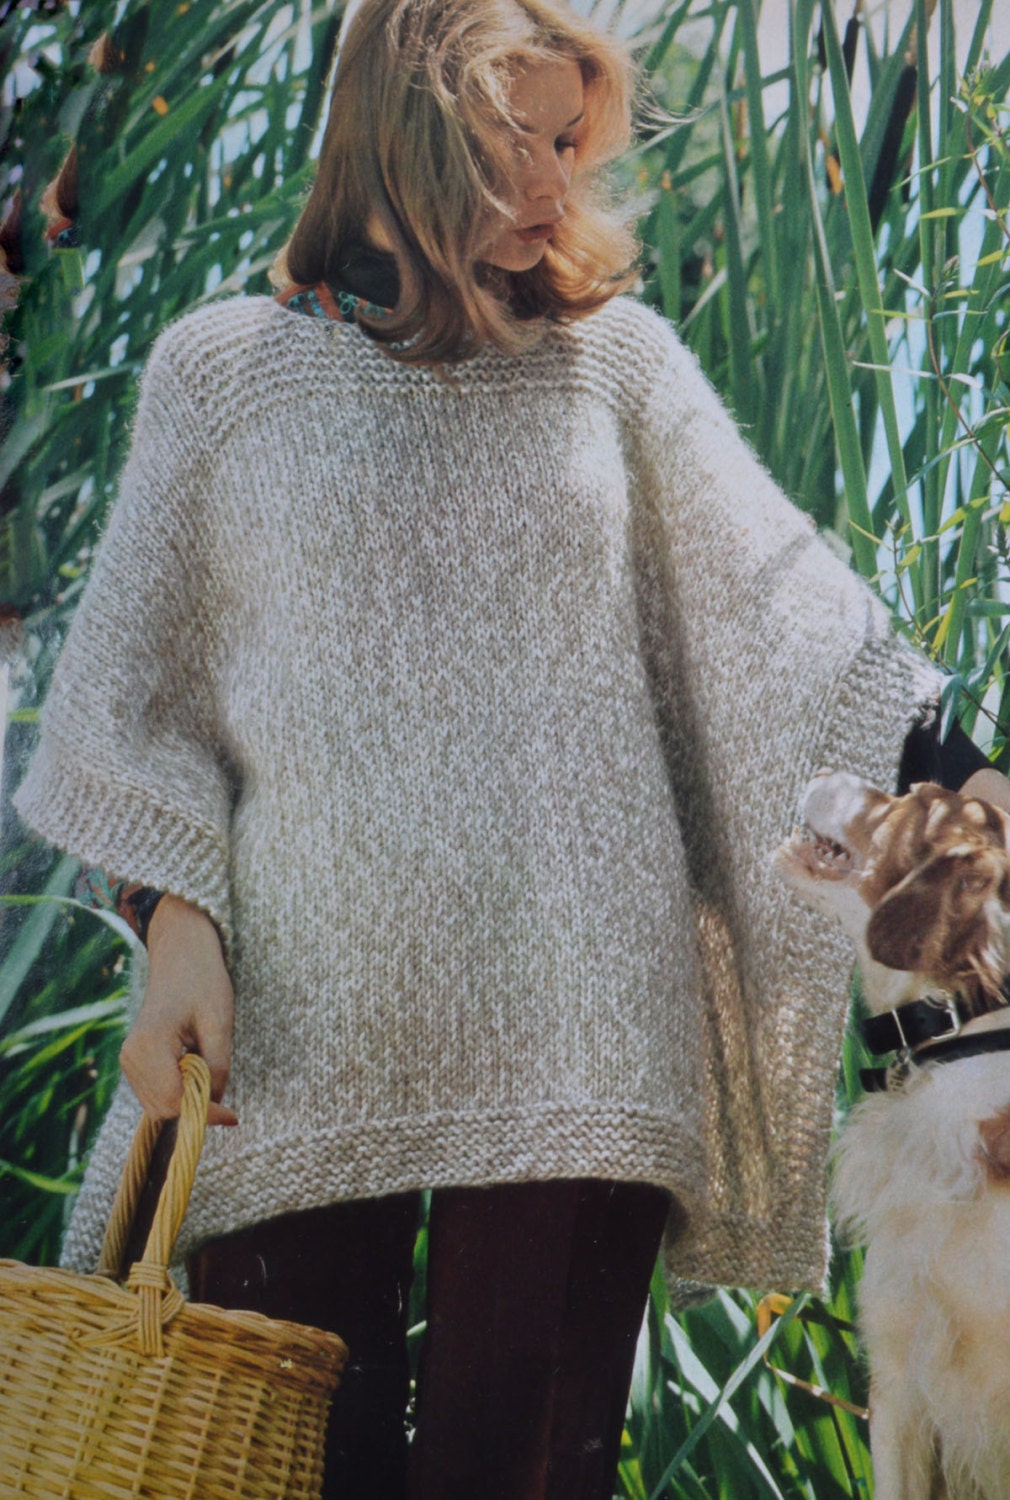 Simple poncho pdf cover up adult woman's vintage knitting